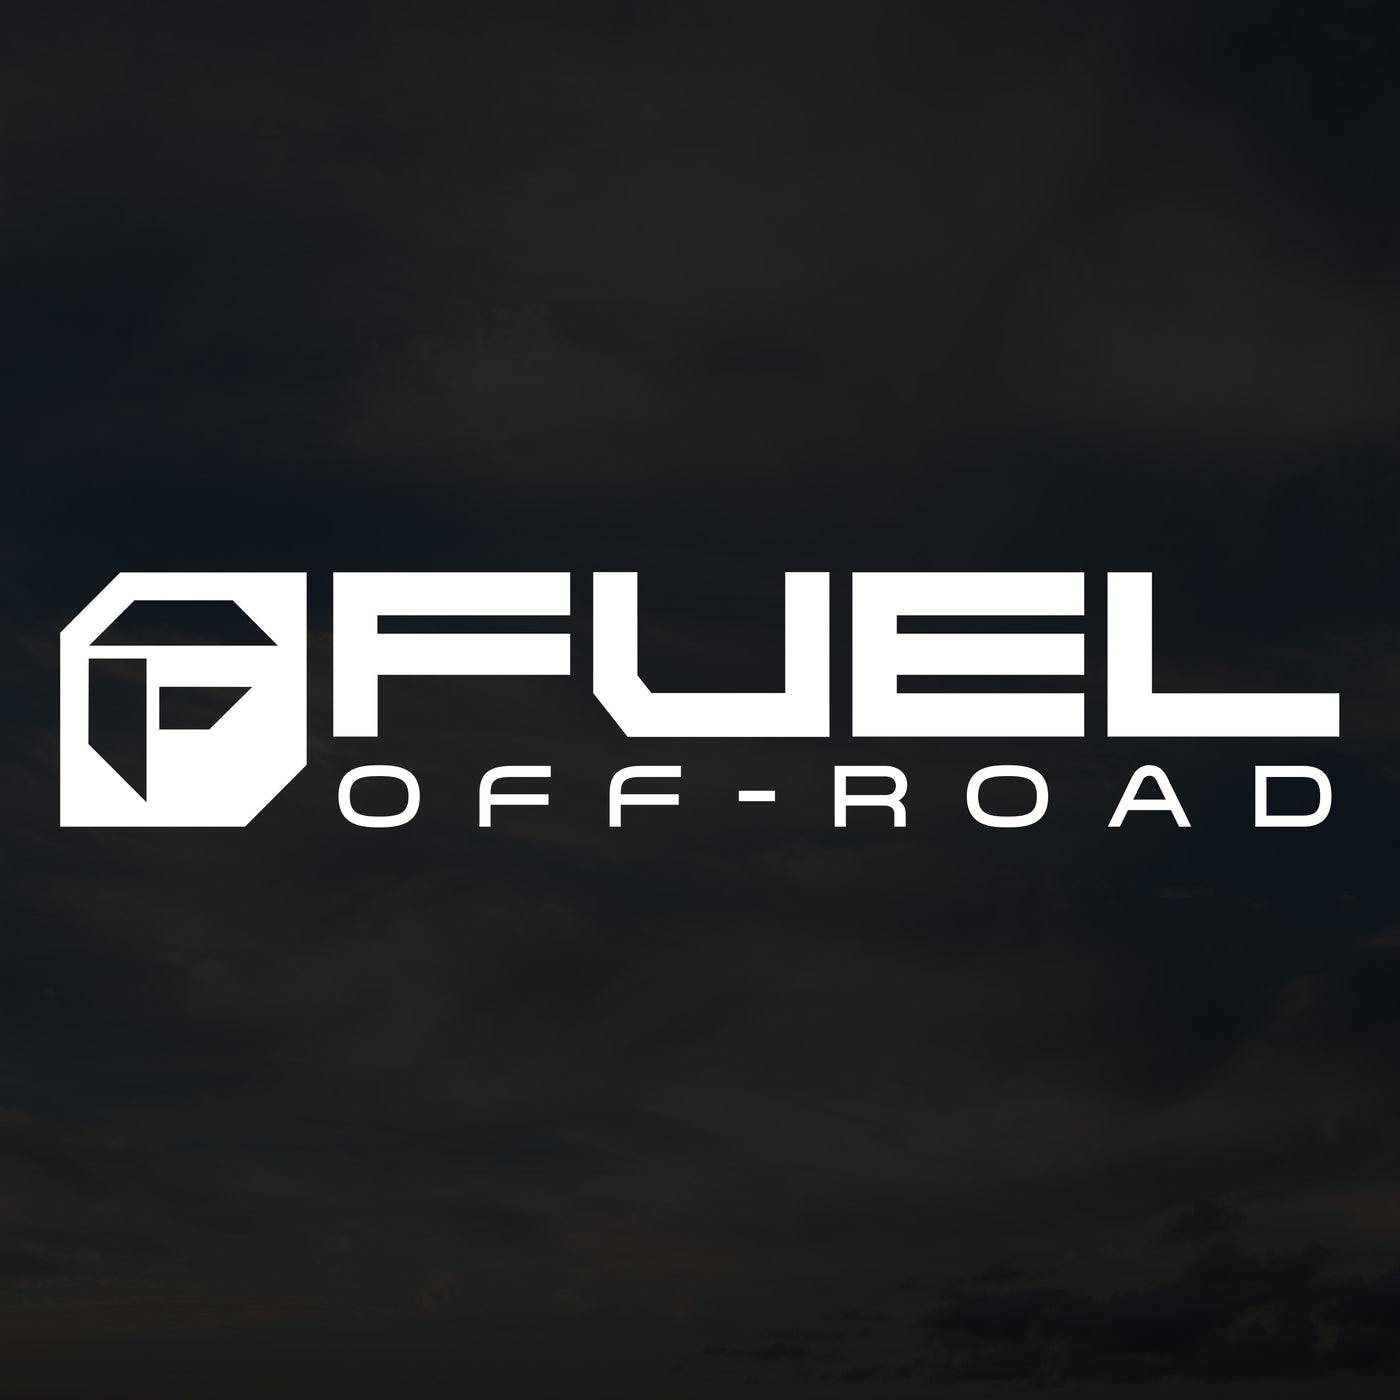 Fuel Cut Transfer Decal - White